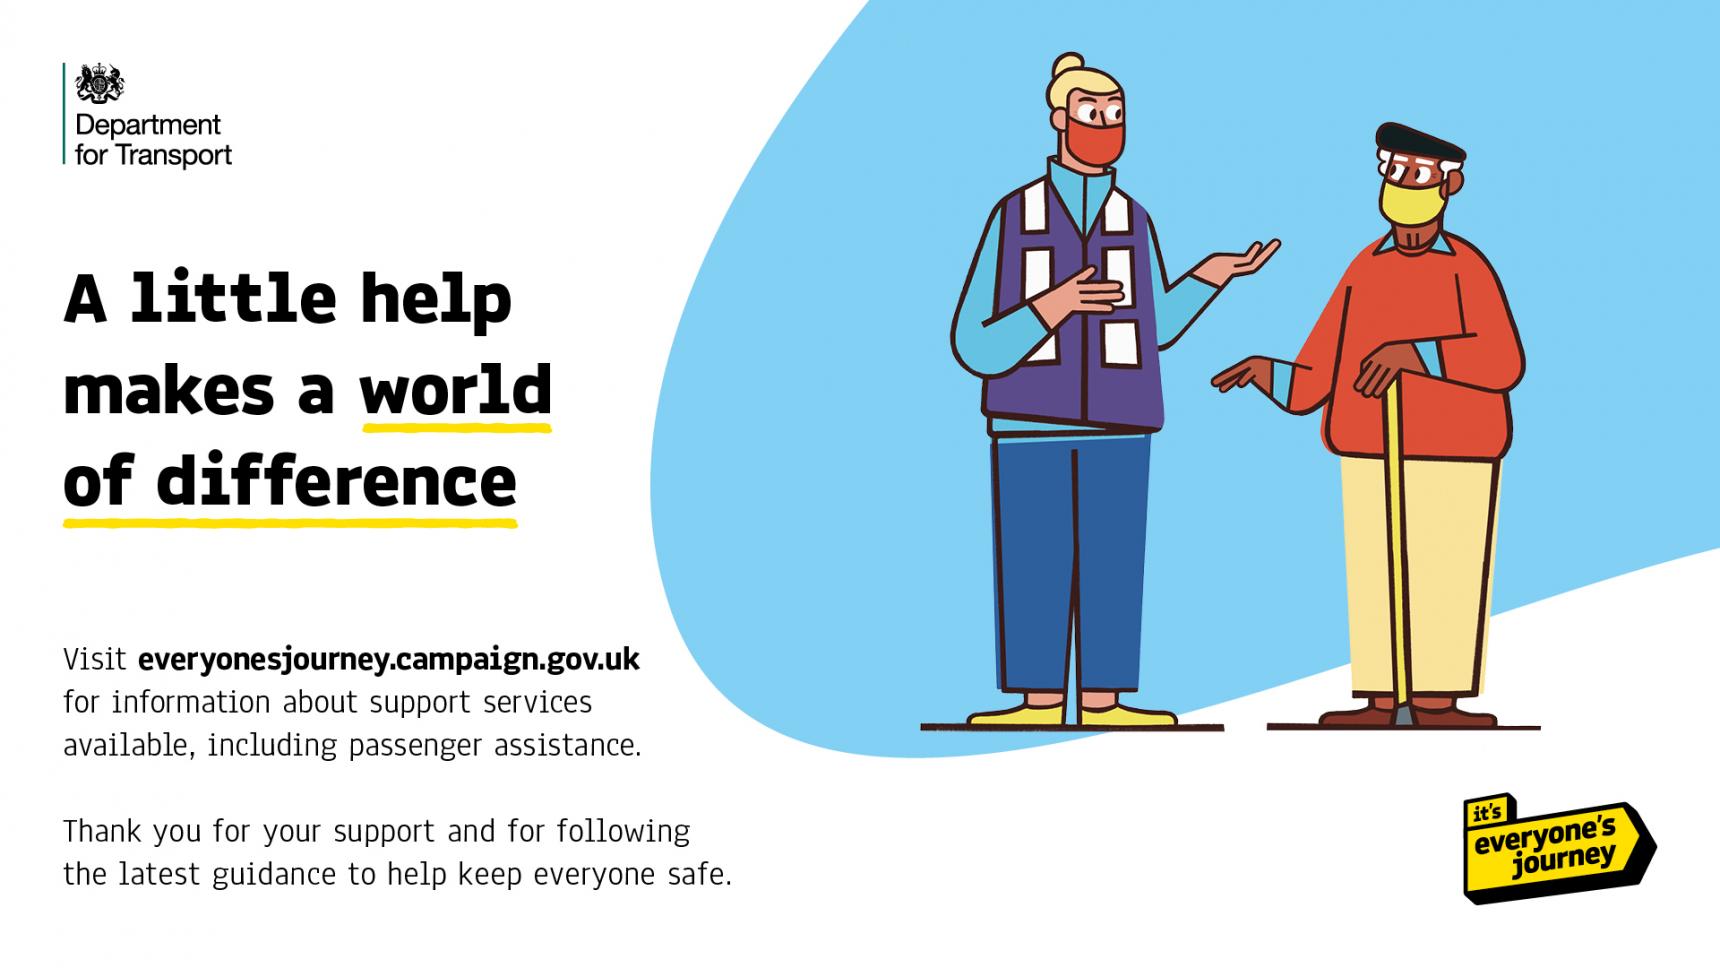 Graphic with the Department for Transport and it’s everyone’s journey logo and the text “A little help makes a world of difference.”